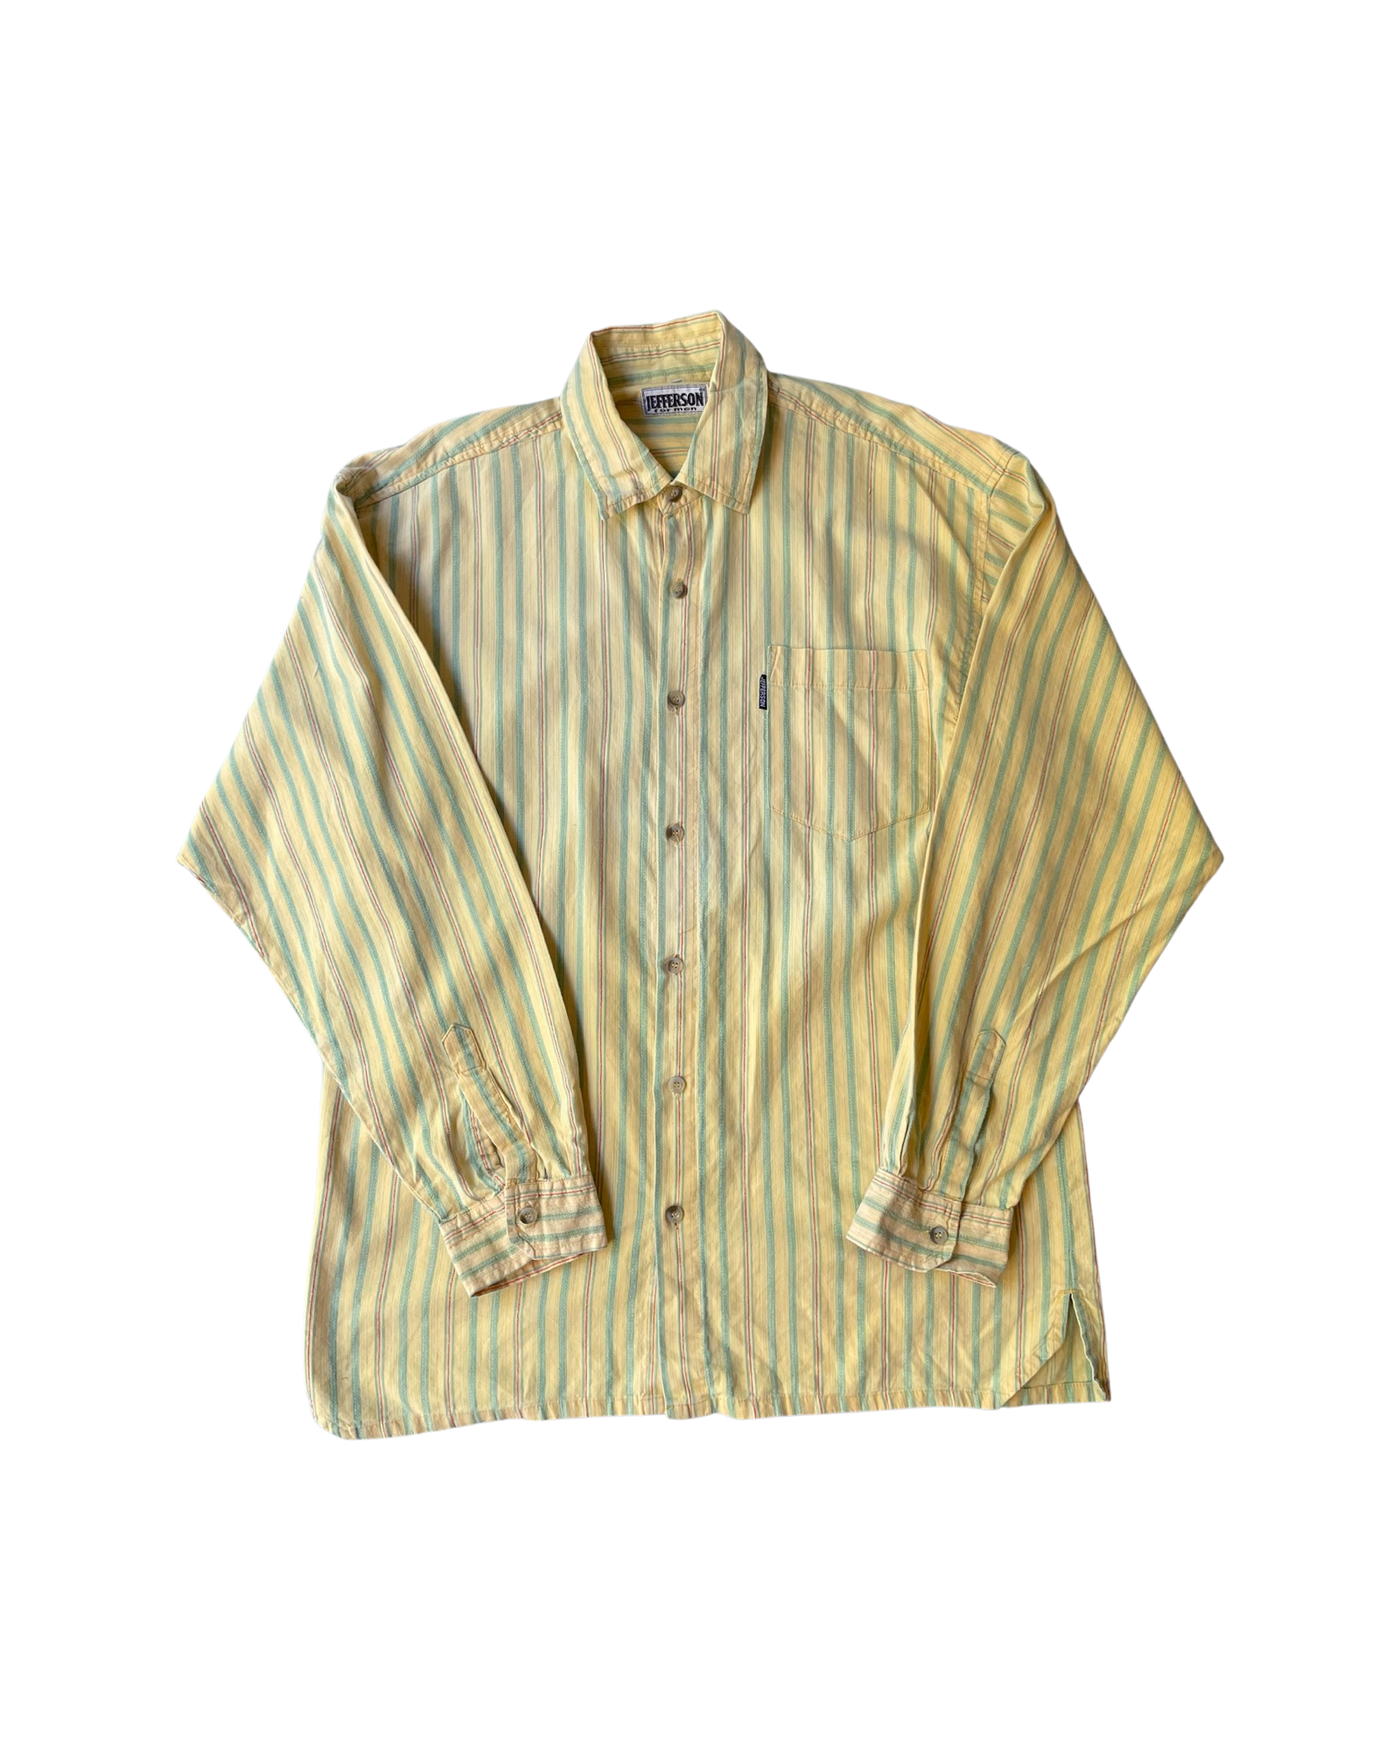 Vintage 90’s Stripped Shirt